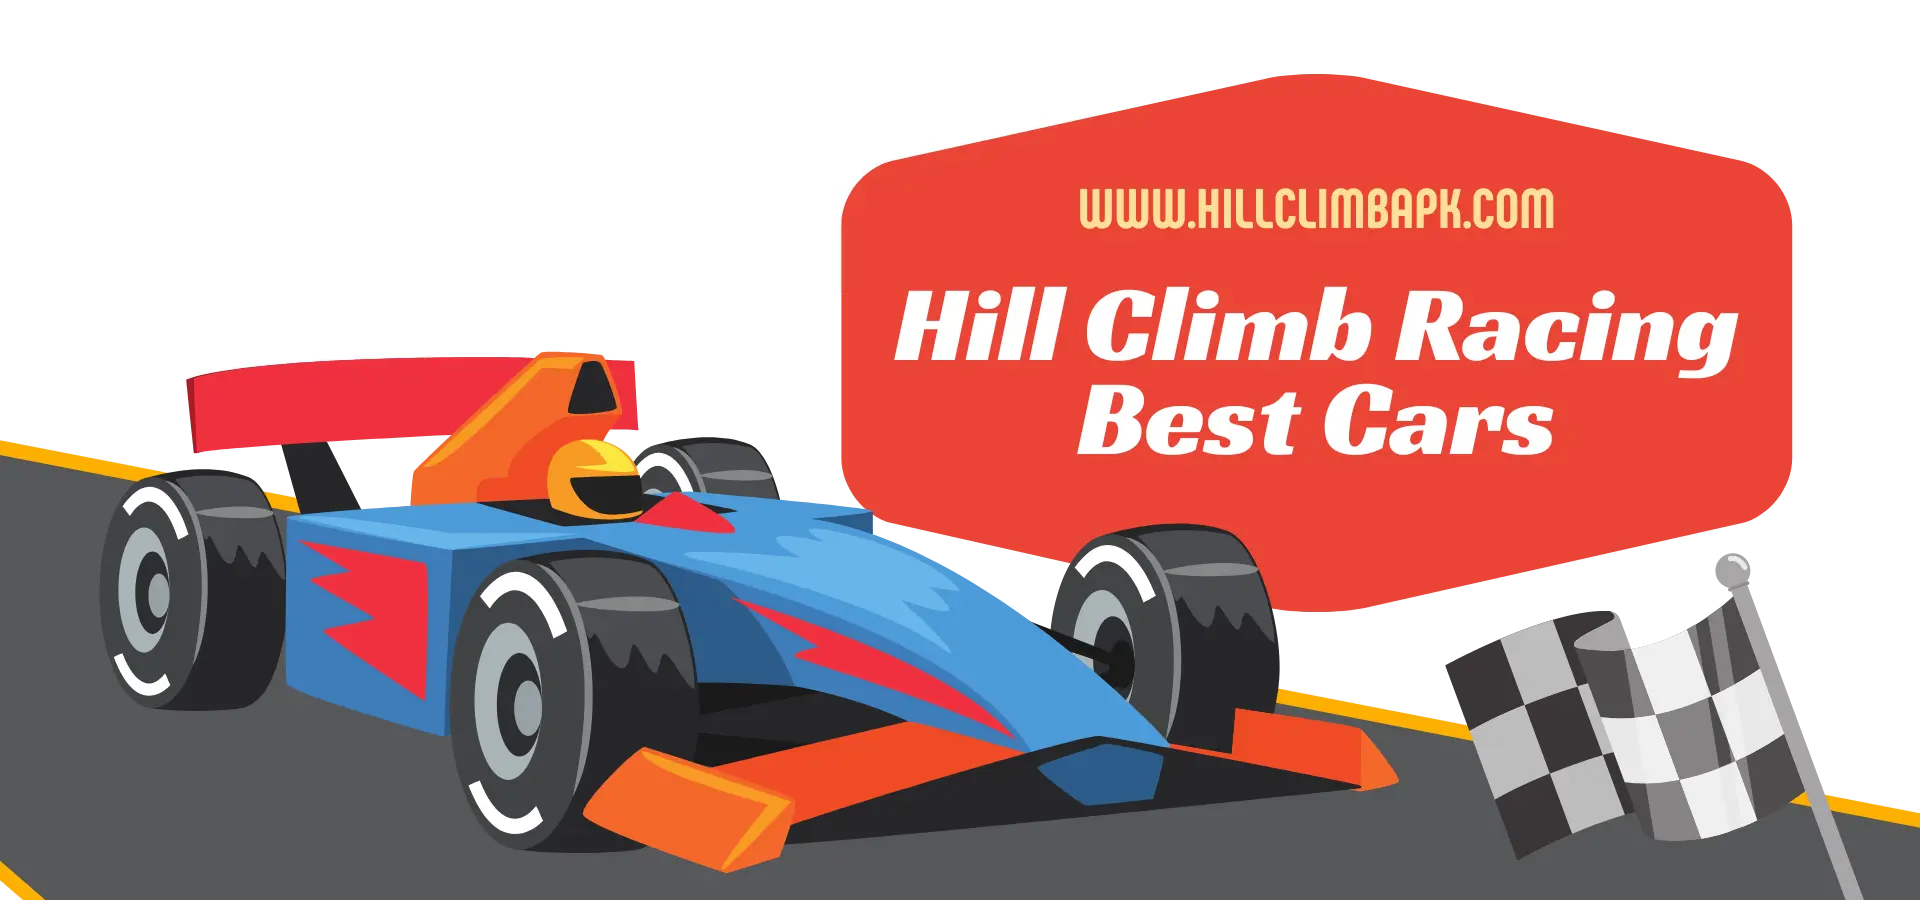 title image- hill climb racing best cars